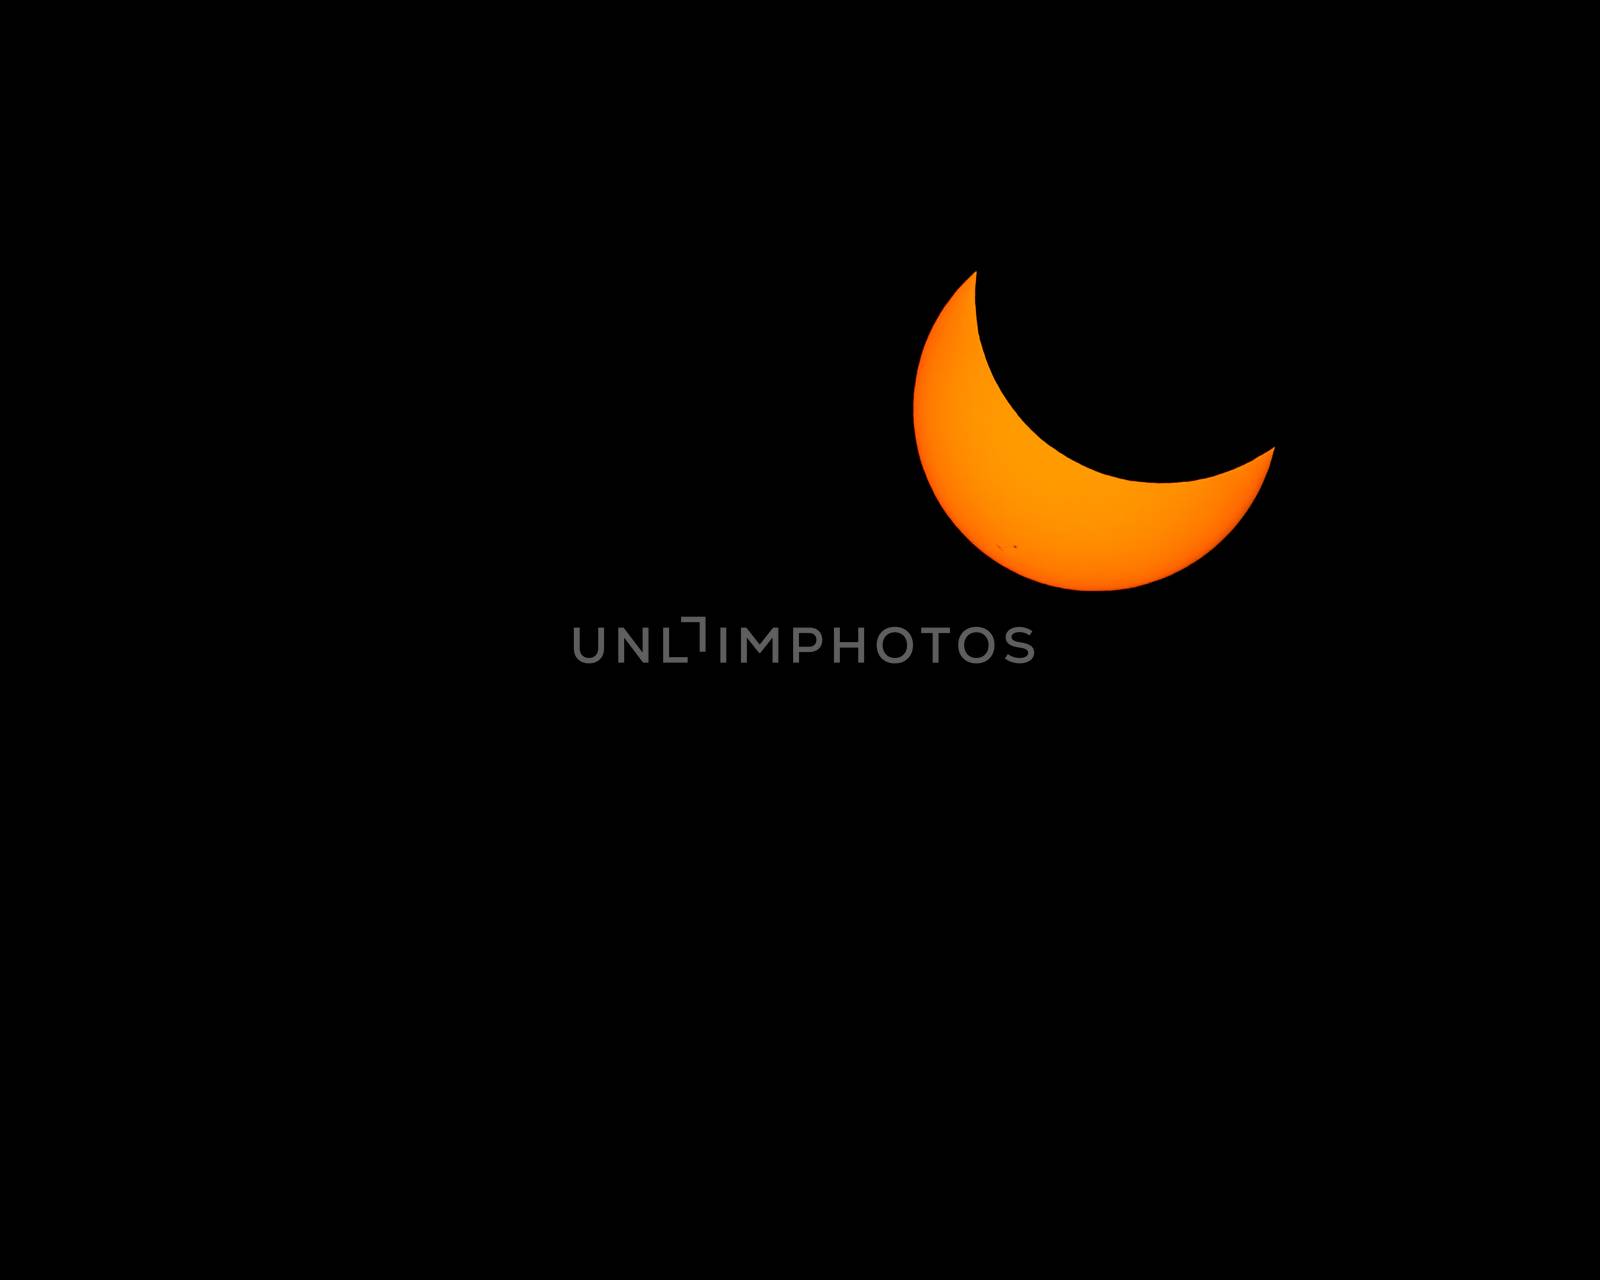 The Great American Eclipse August 2017, Color image taken in Corvallis, Oregon, USA